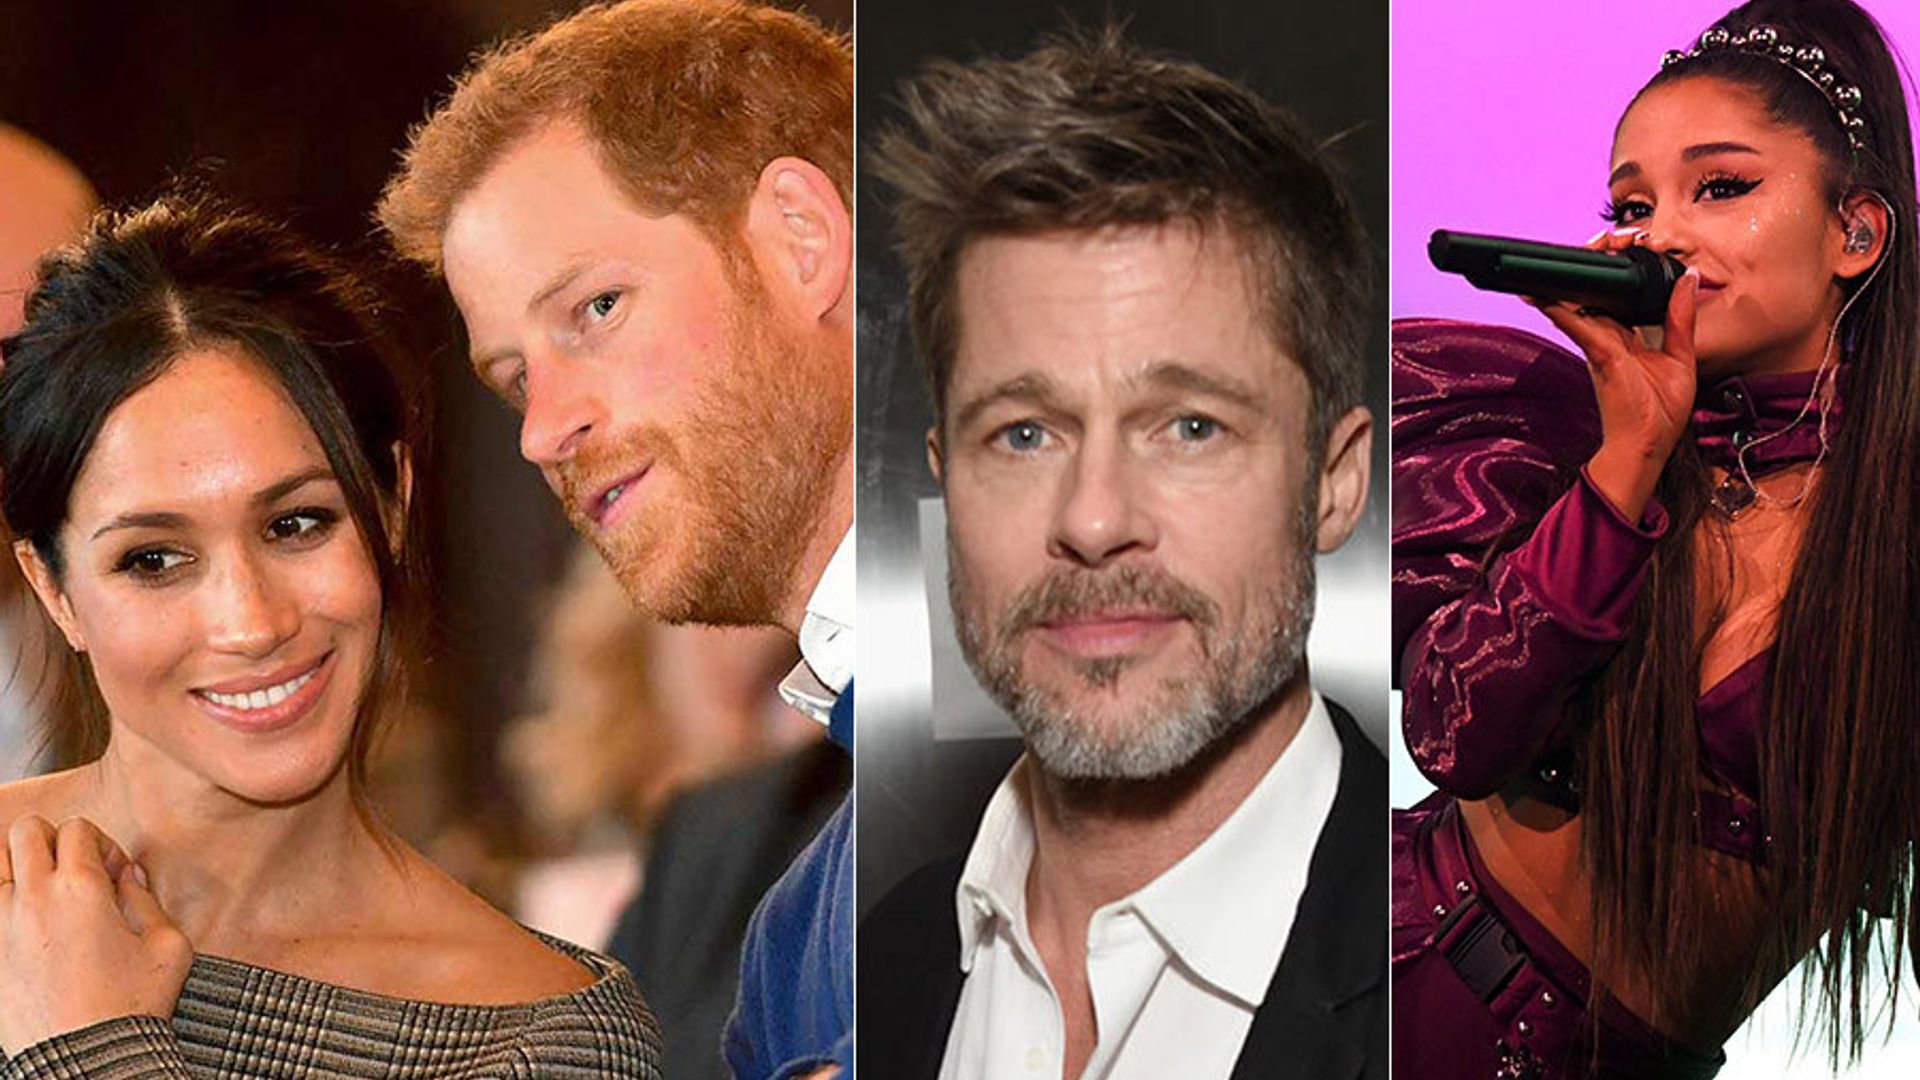 Stars and royals who have been strong allies to the LGBTQ community